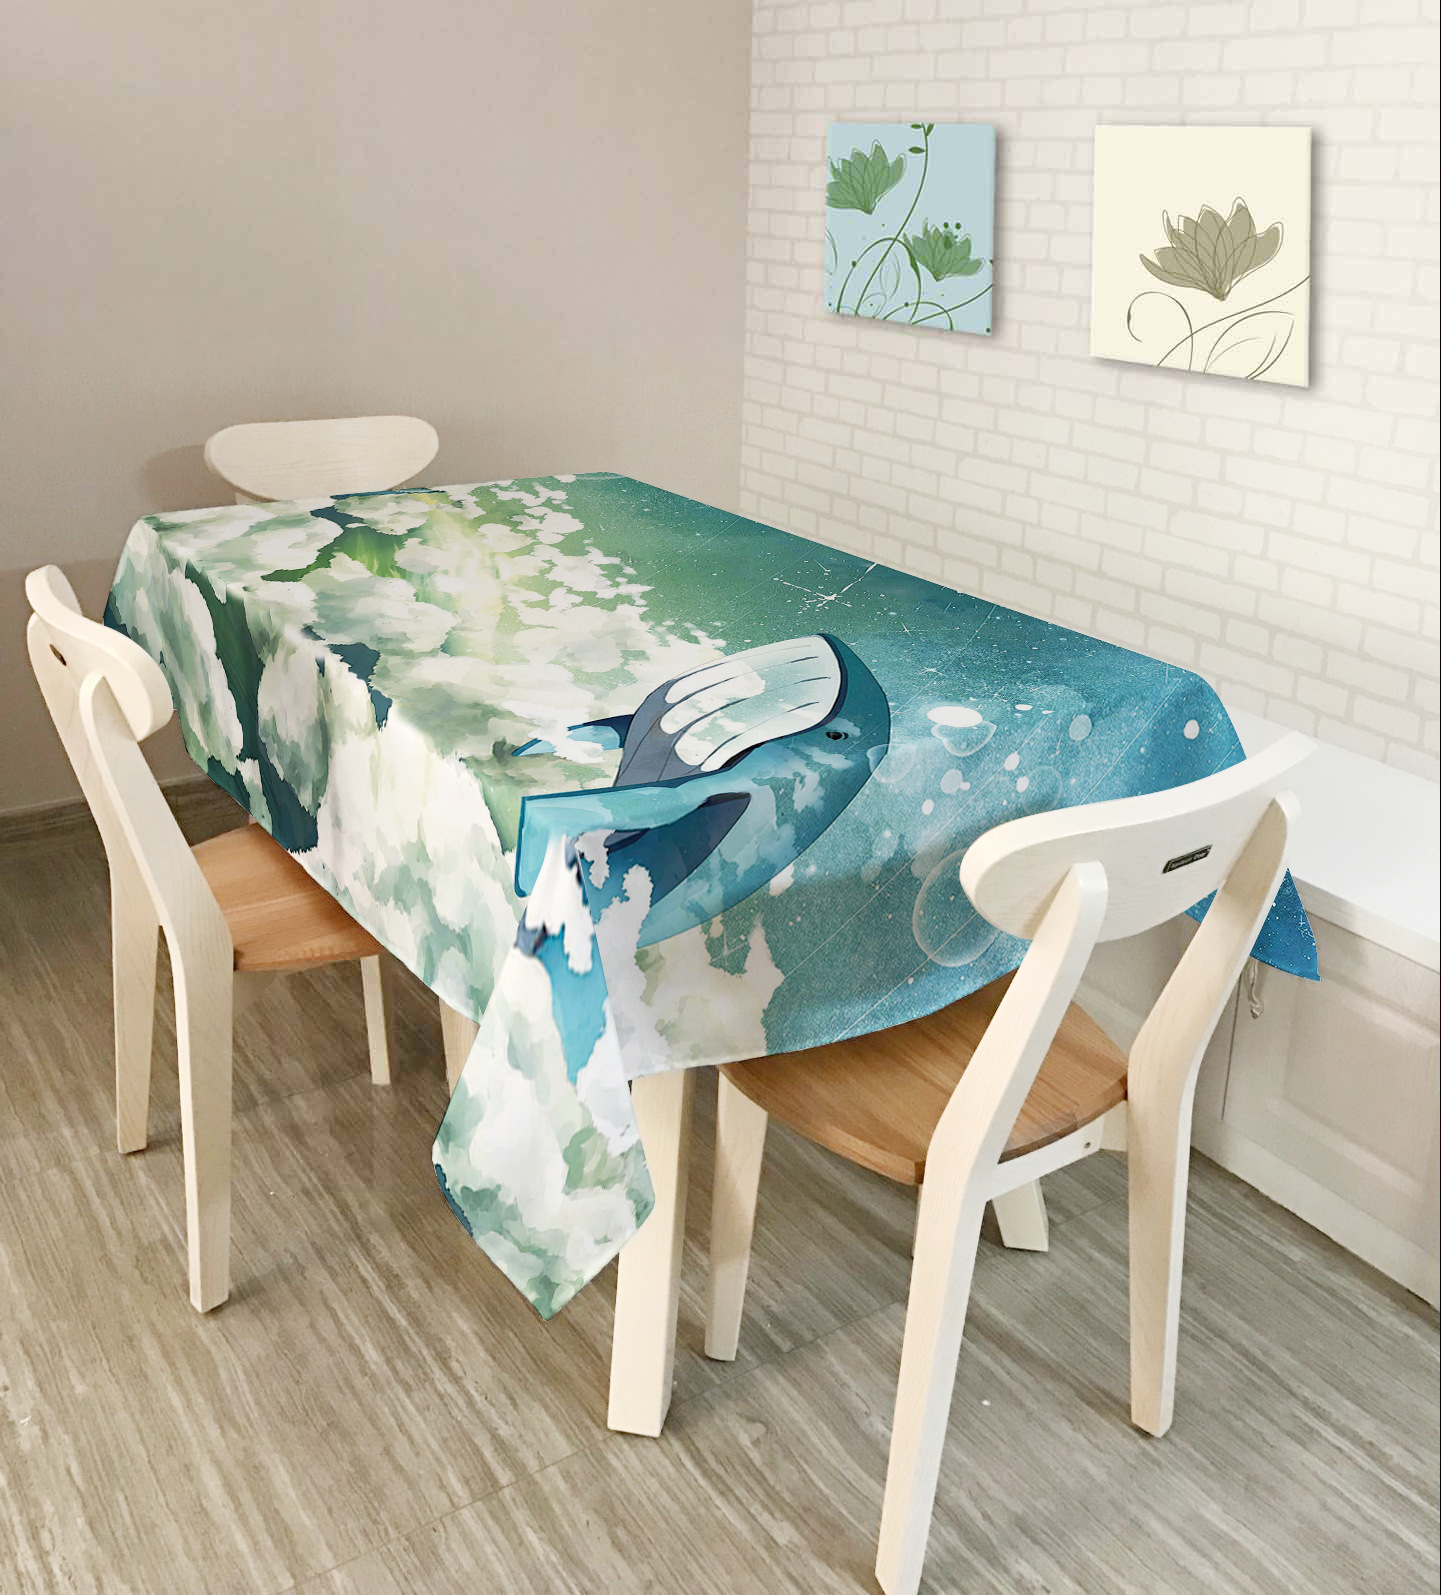 American-Style-Creative-Landscape-Tablecloth-Waterproof-Oil-Proof-Tea-Tablecloth-Home-Party-Decor-1185731-6